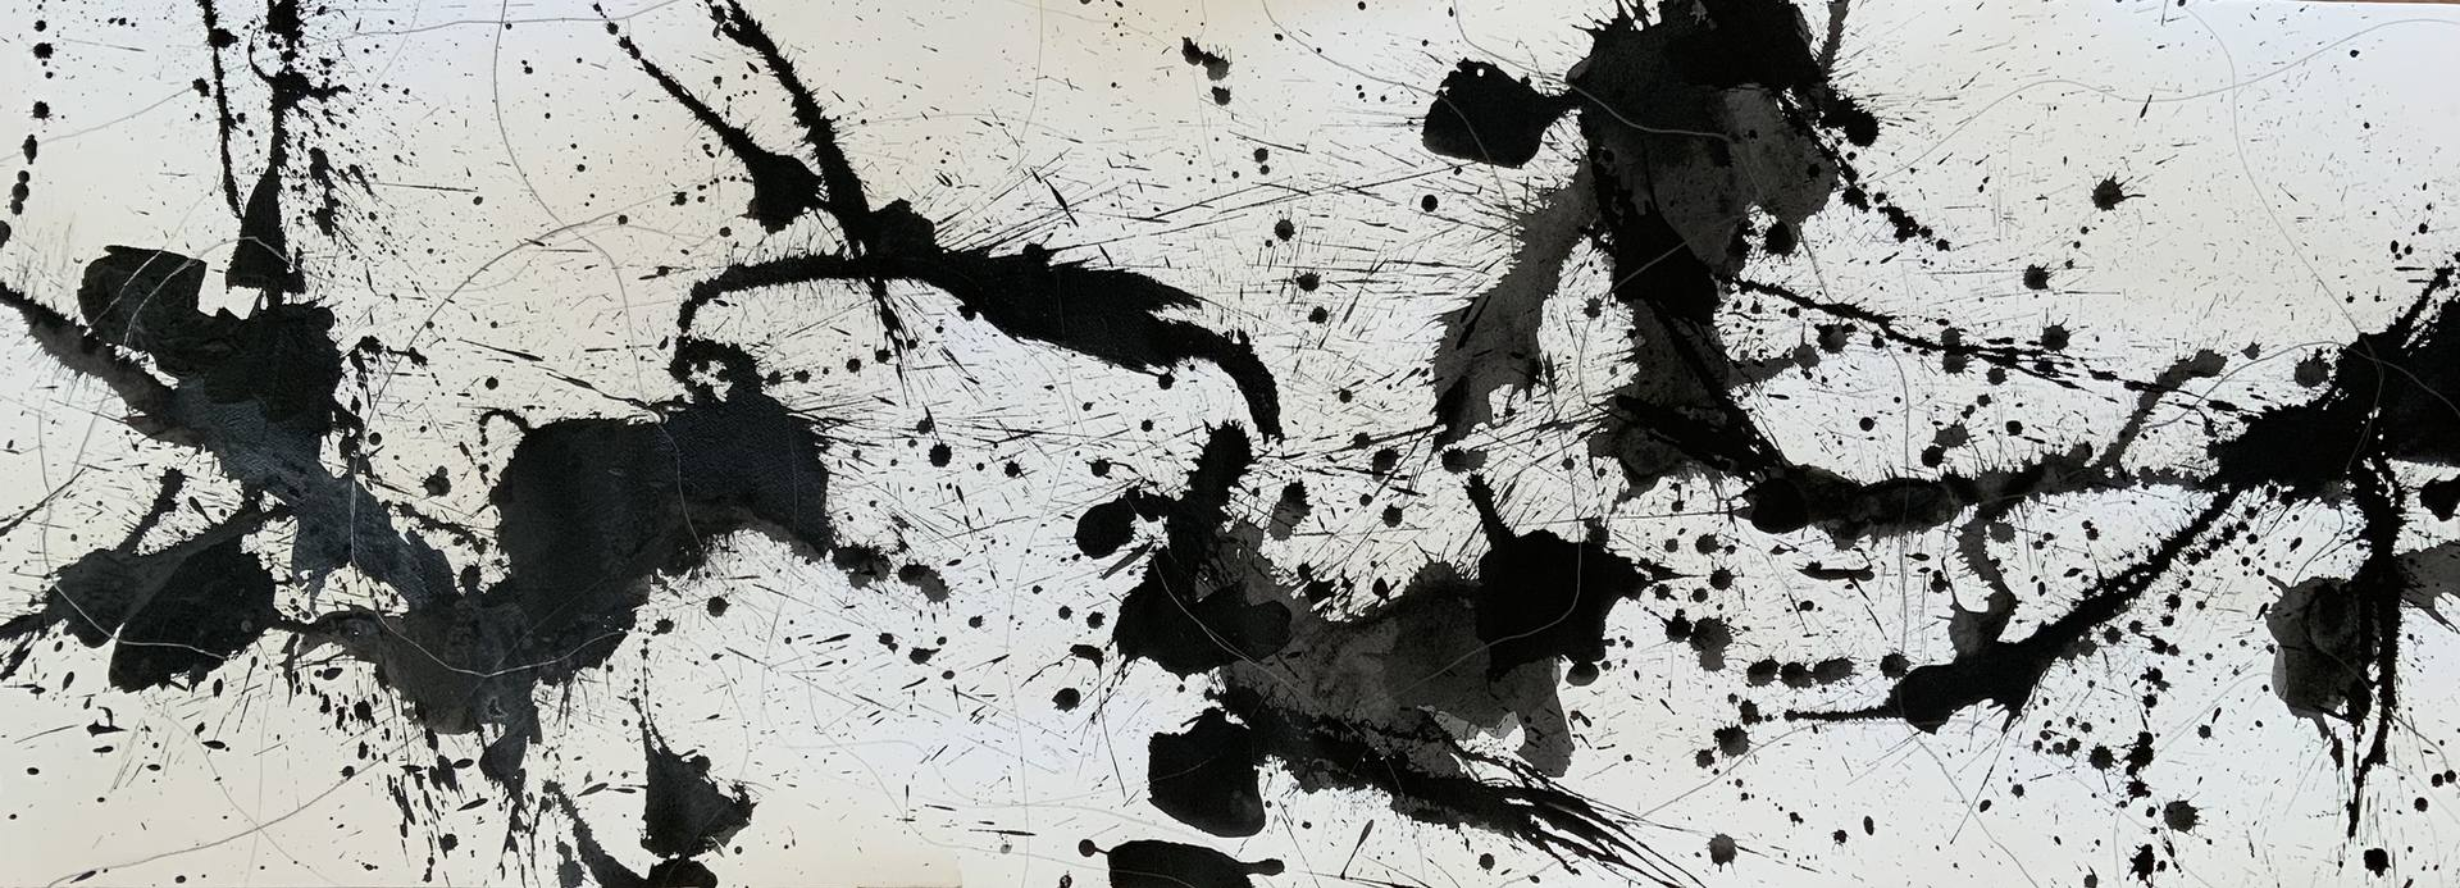 Beauty-Awakens-Soul-to-Act-Luciana-Palazzolo-Abstract-Painting-Black-on-white-background